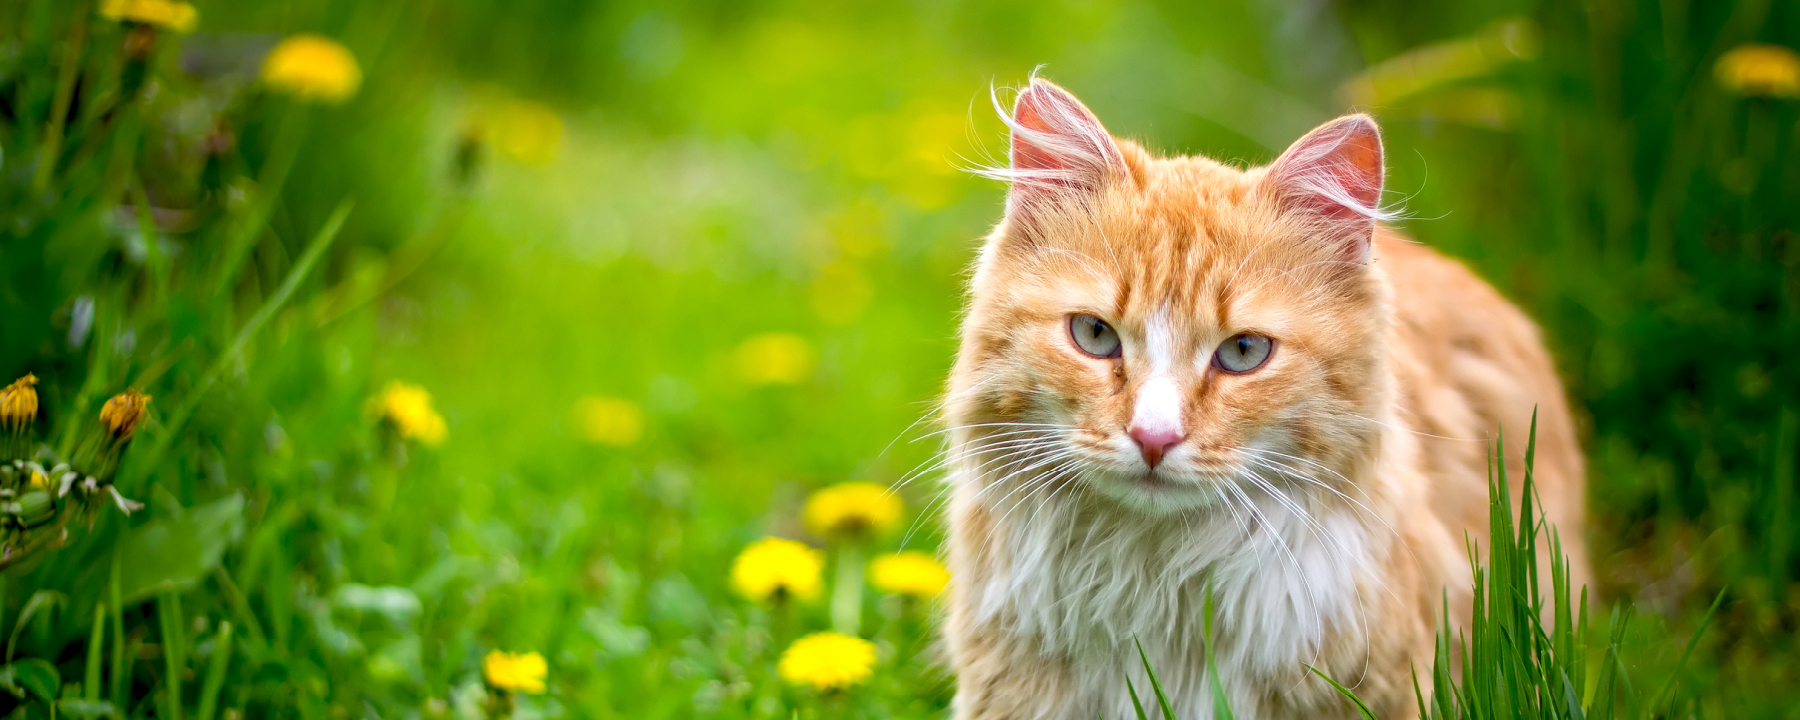 Skin Conditions and Problems in Cats